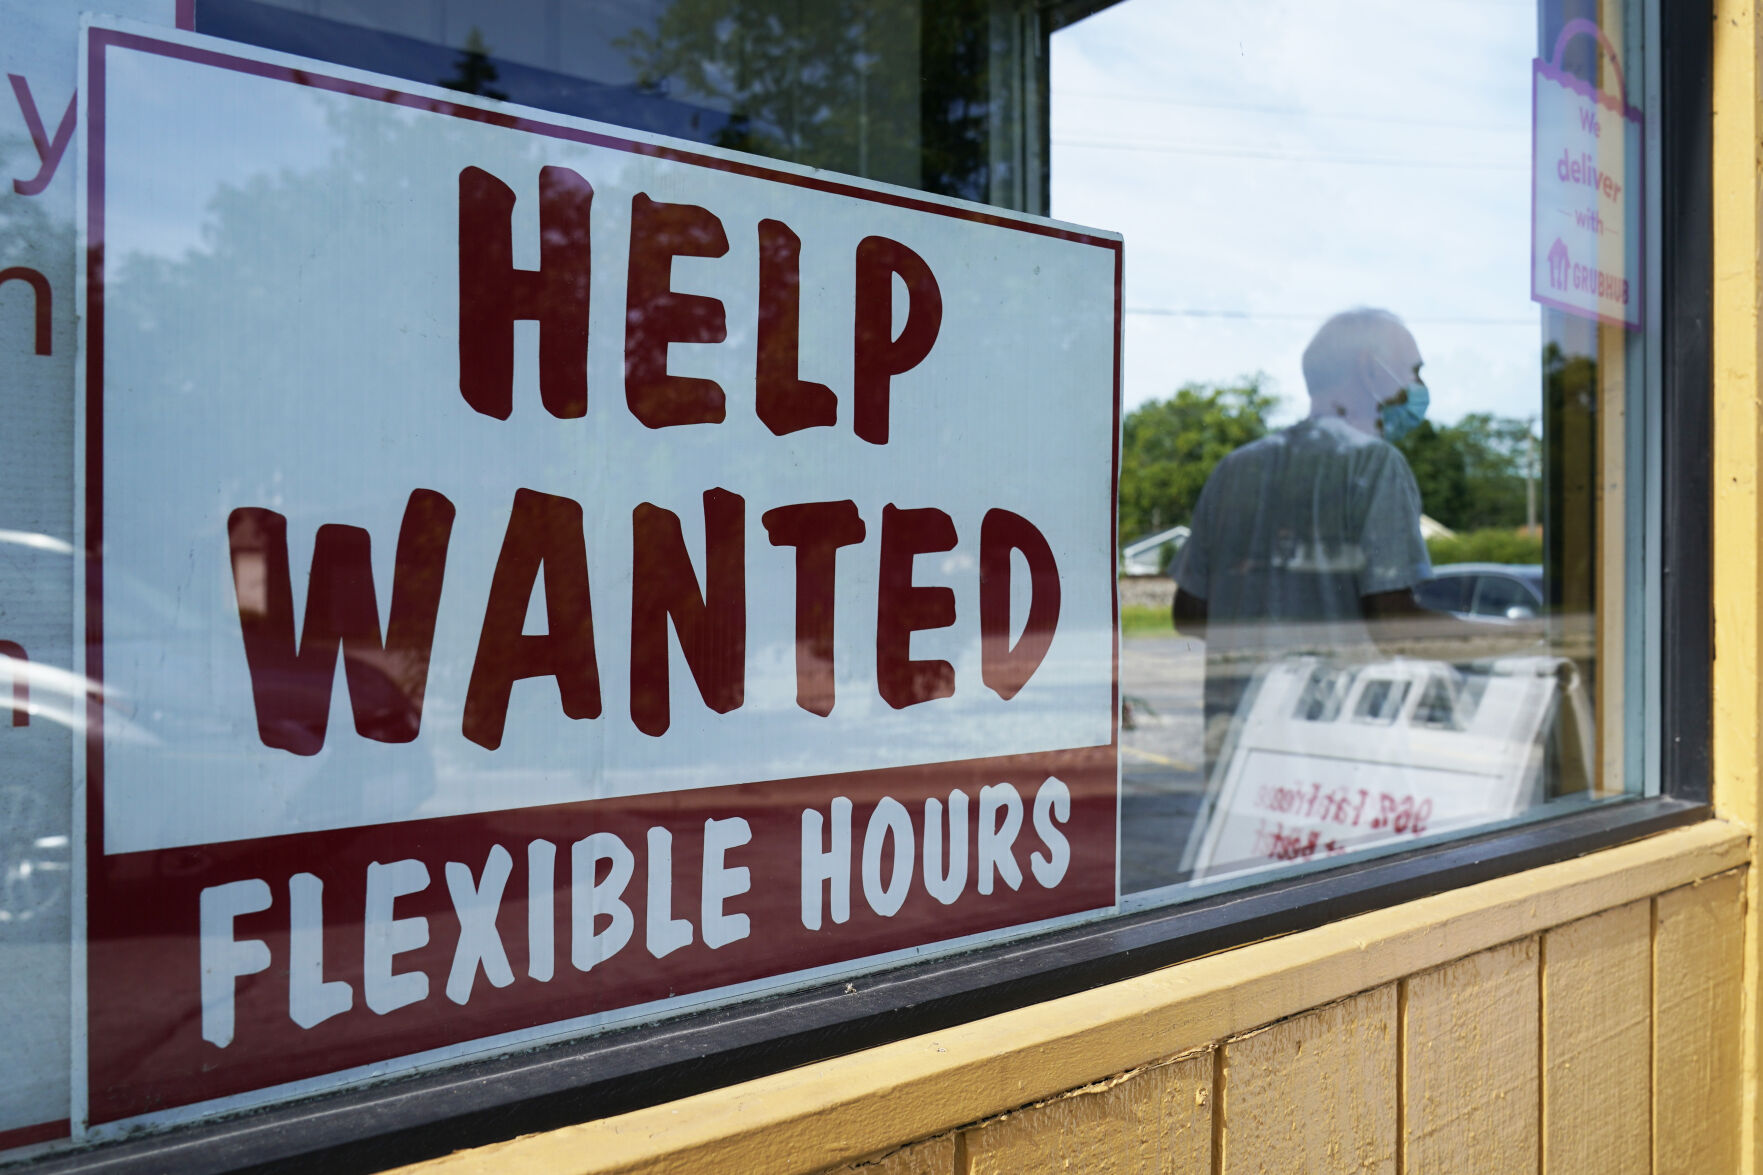 <p>FILE - A Help wanted sign is displayed in Deerfield, Ill., Wednesday, Sept. 21, 2022. The Labor Department reports on Thursday the number of people who applied for unemployment benefits last week. (AP Photo/Nam Y. Huh, File)</p>   PHOTO CREDIT: Nam Y. Huh - staff, AP